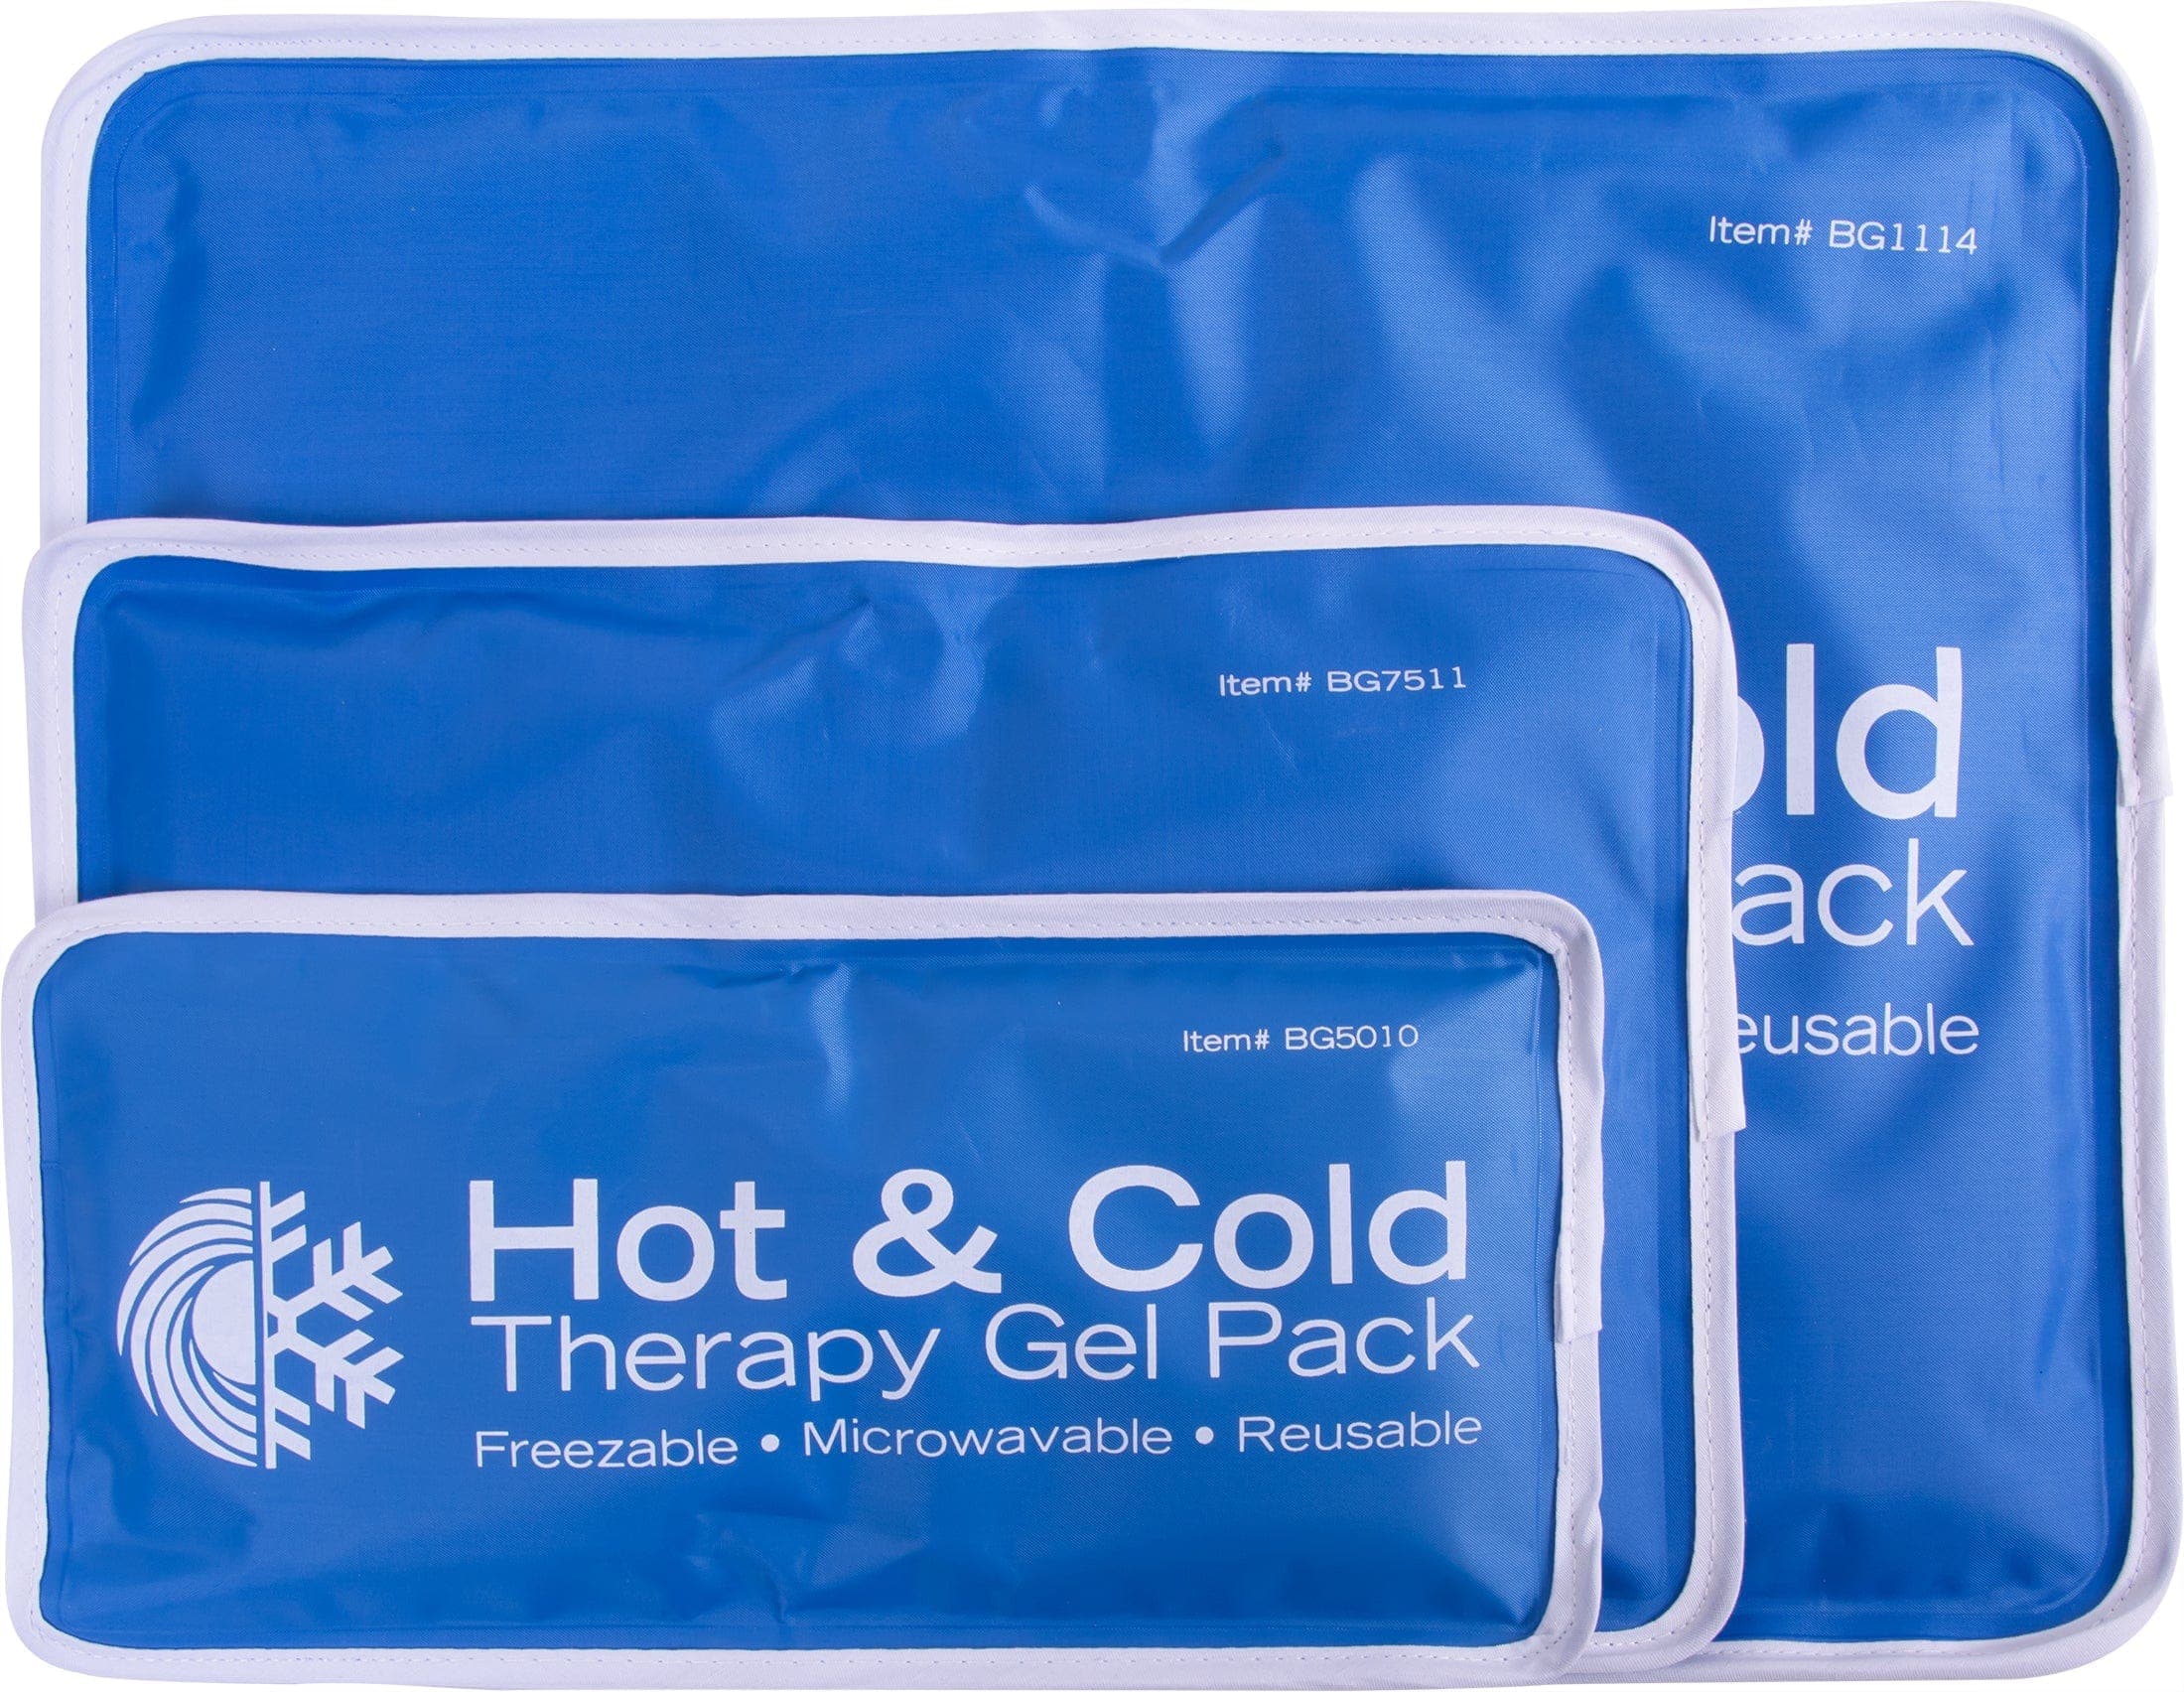 Compass Health Reusable Hot/Cold Packs and Wraps Compass Health Roscoe Reusable Hot/Cold Gel Pack (5" x 10")